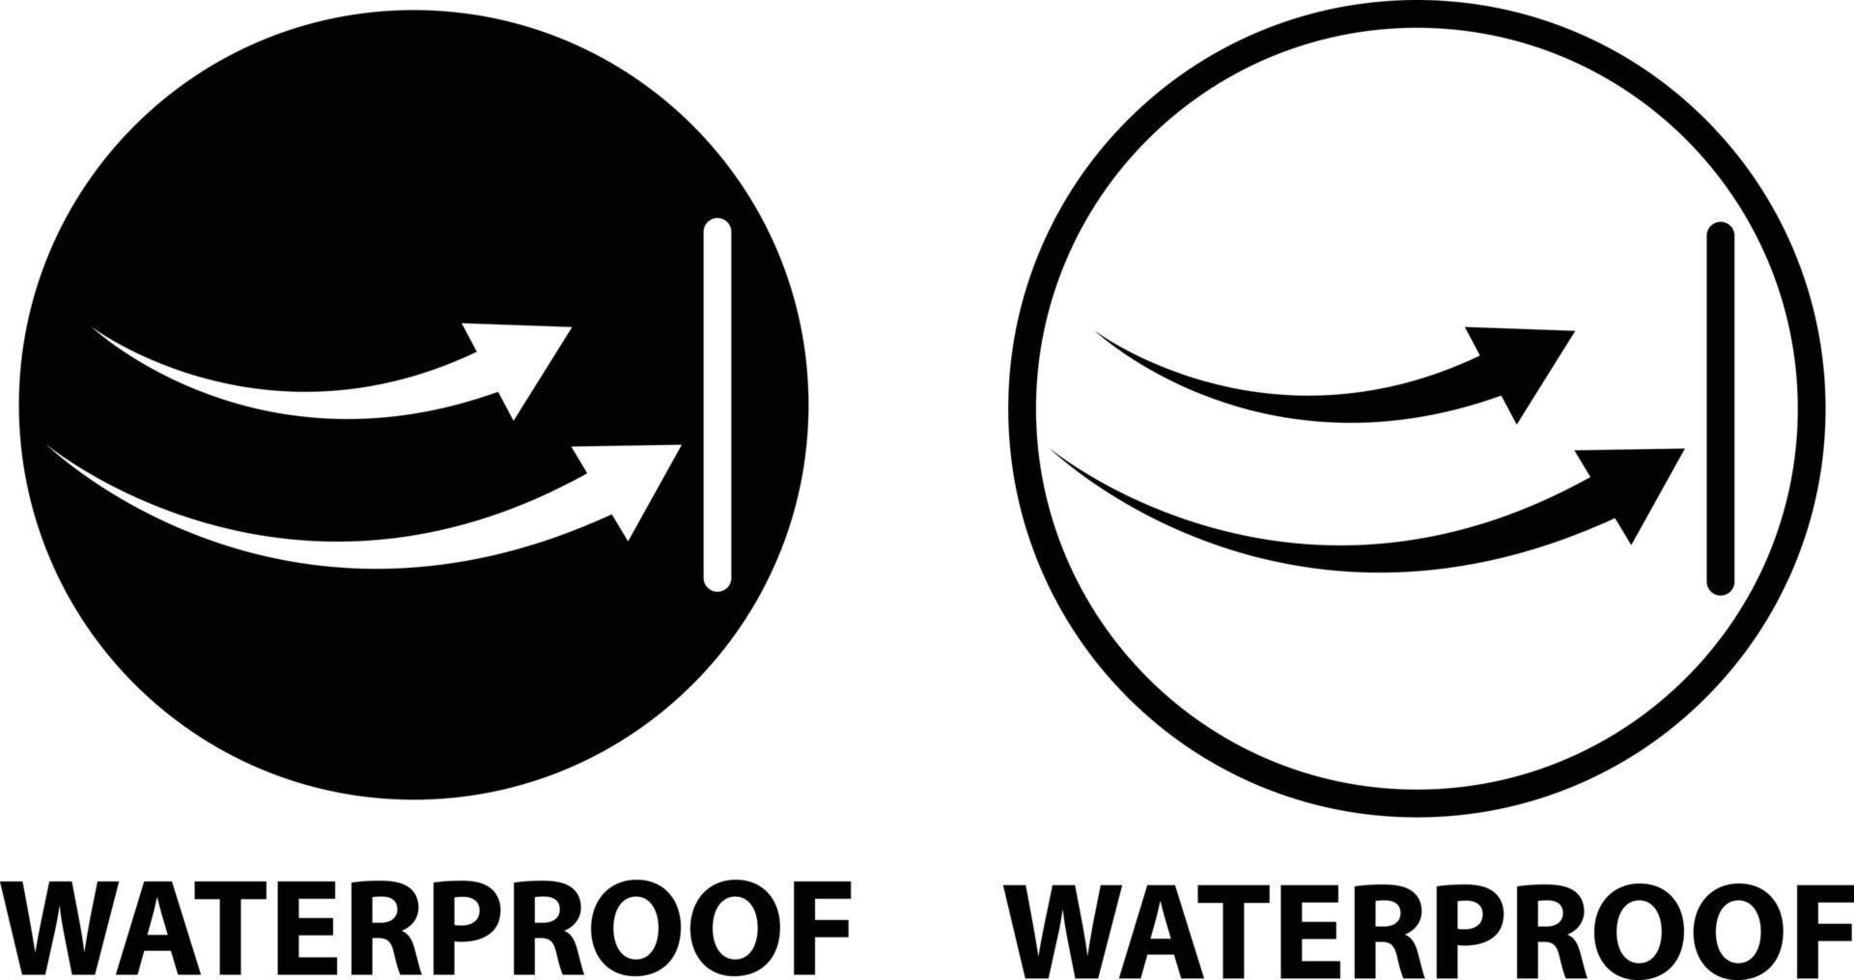 windproof icon on white background. Waterproof Windproof sign. windproof black outline badge symbol. flat style. vector